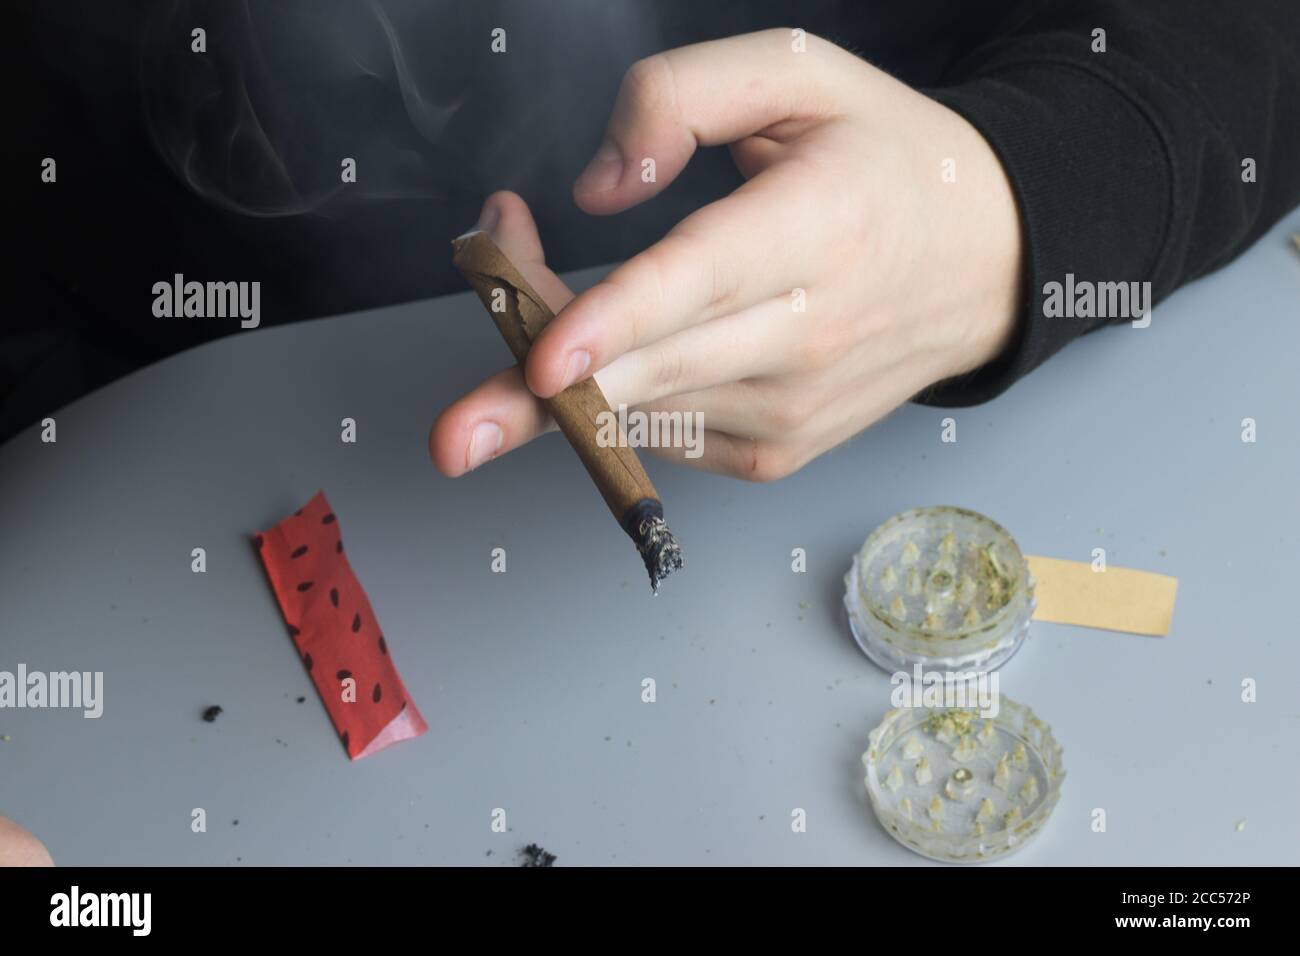 Blunt smoking. Cannabis medical and recreational use. Legal weed Stock Photo